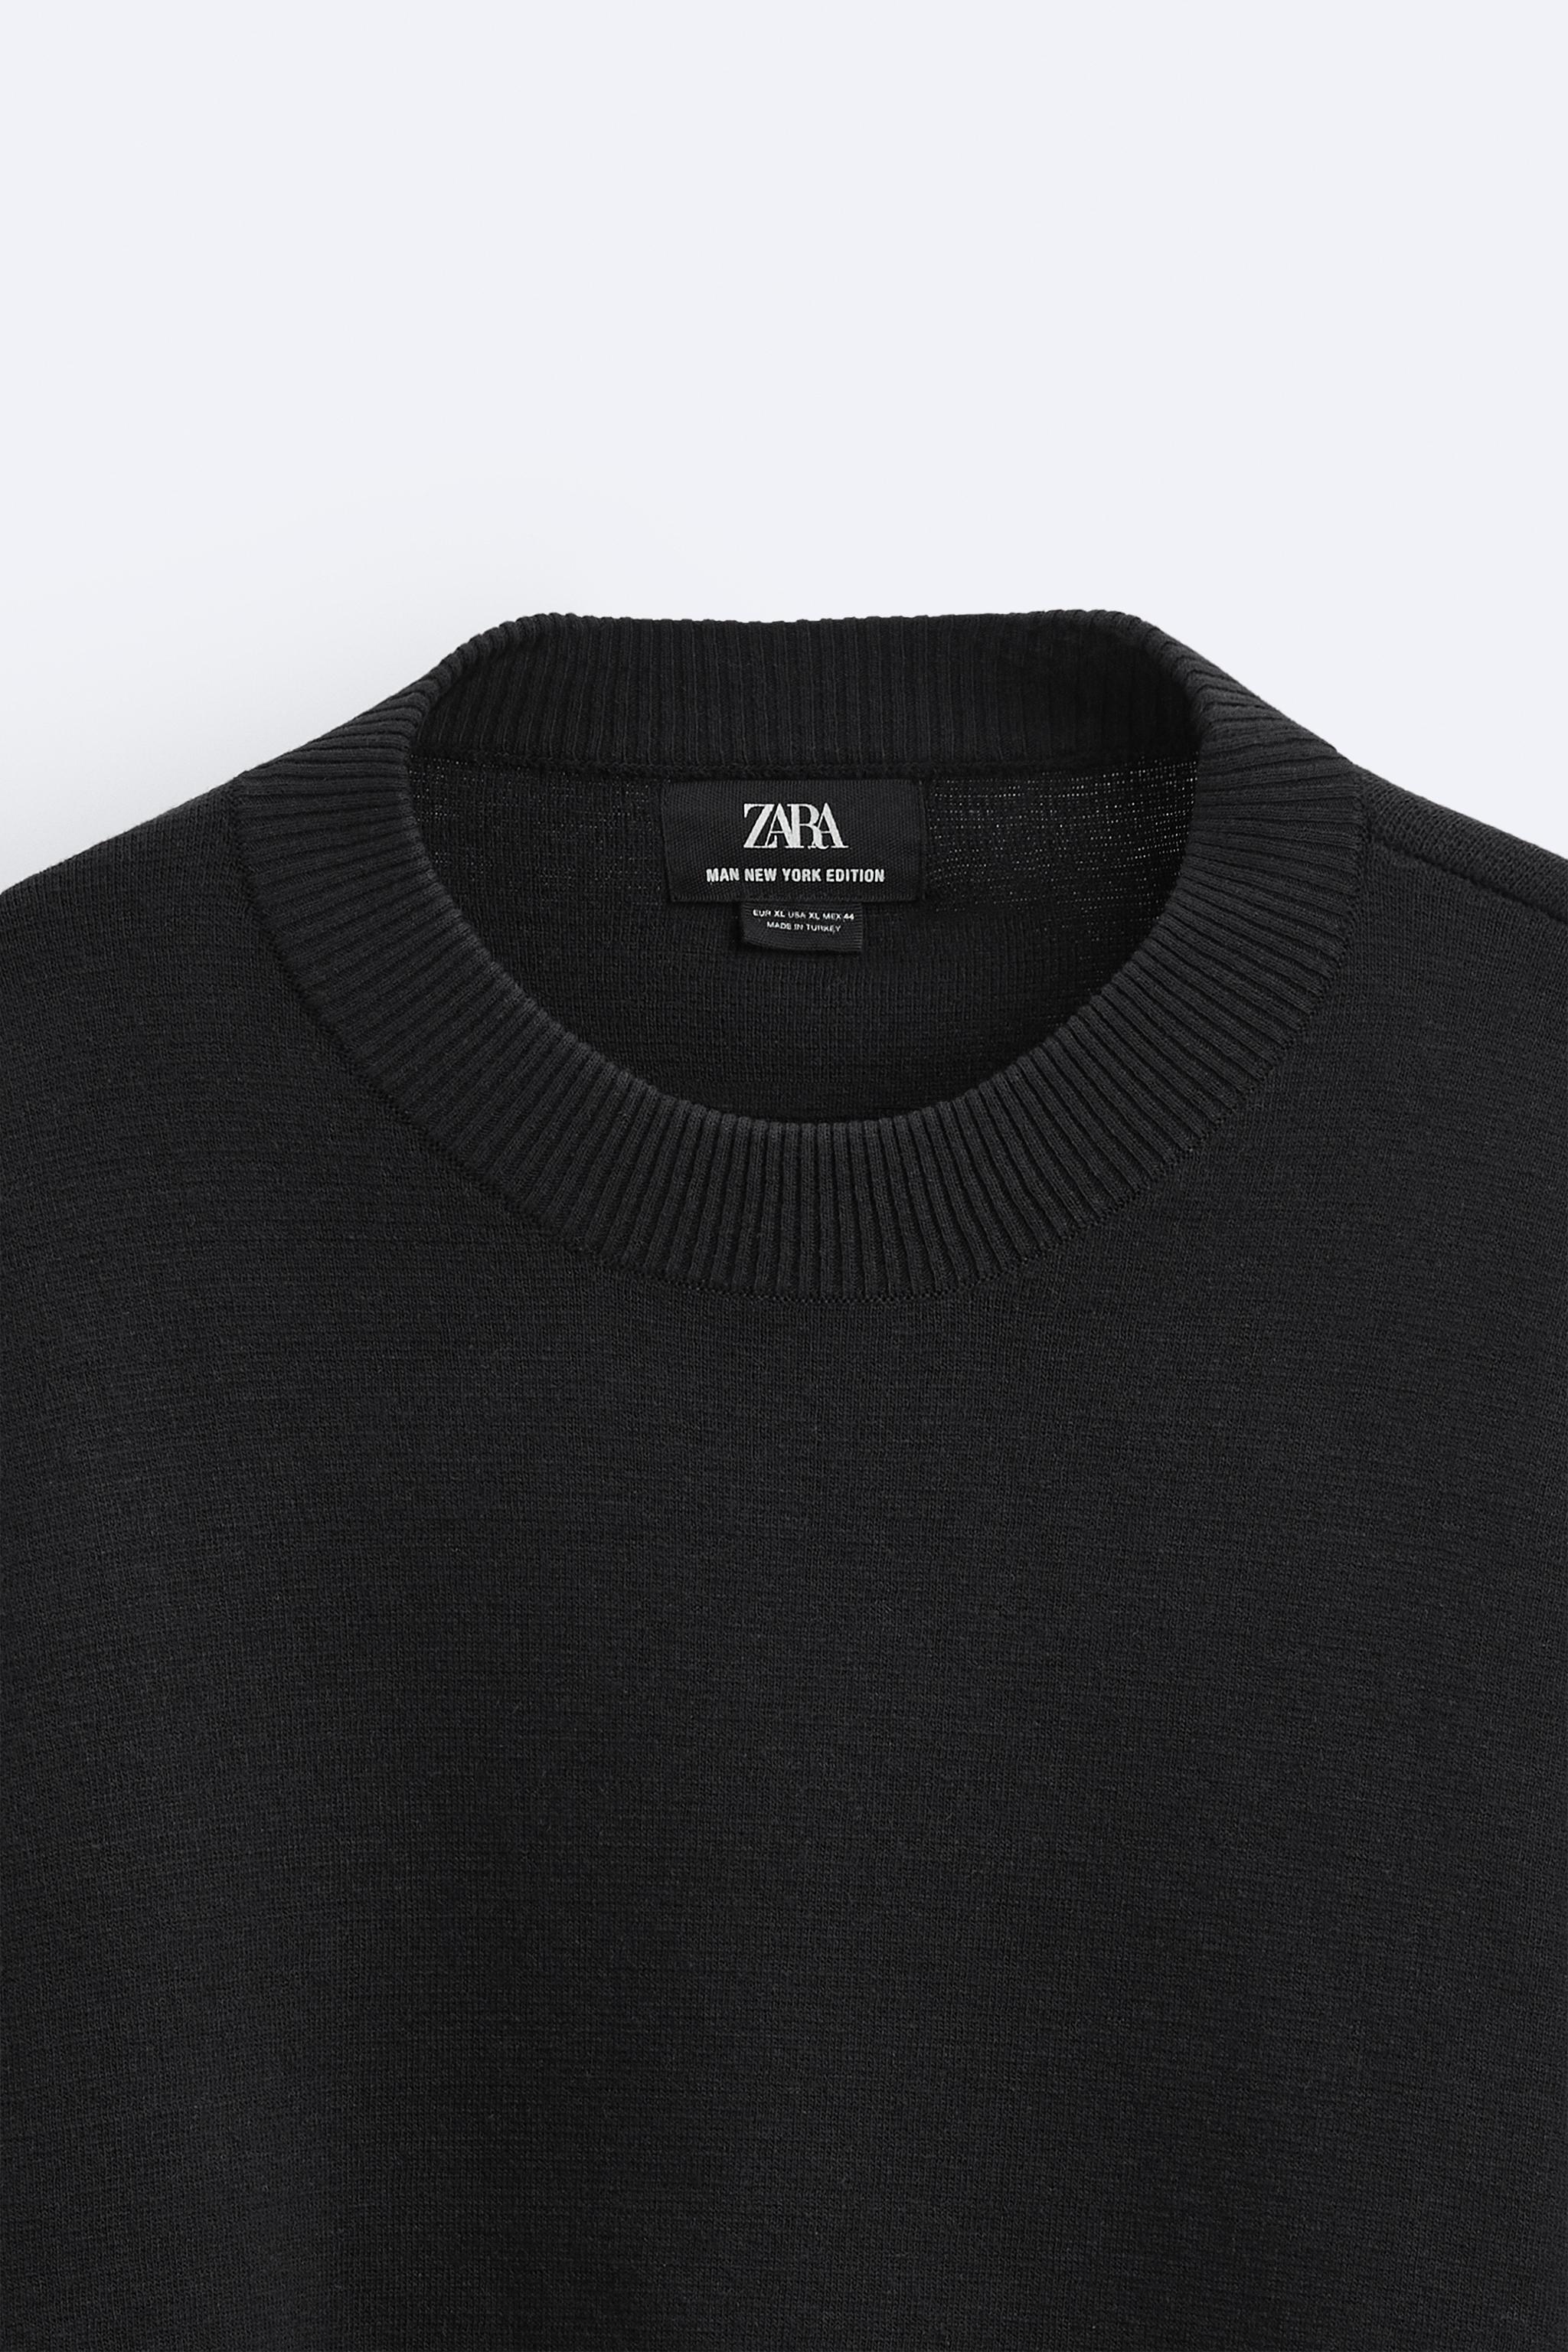 OVERSIZE FIT SWEATER LIMITED EDITION - Black | ZARA Canada